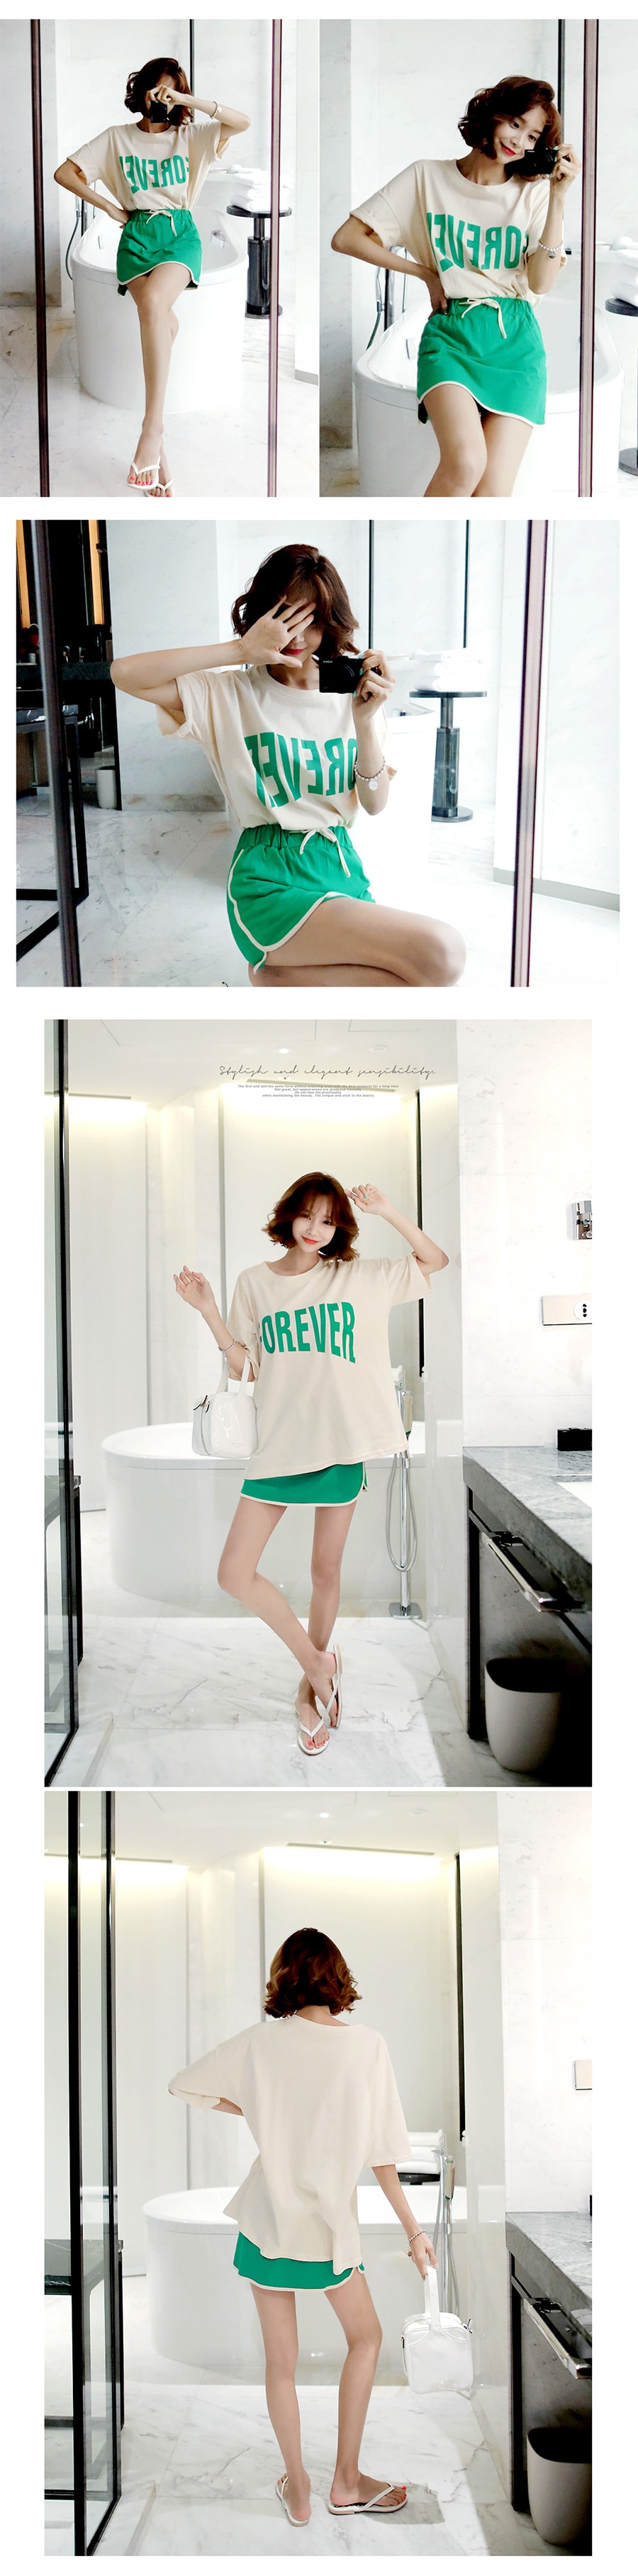 [KOREA] FOREVER Oversized T-Shirt+Sport Skort 2 Pieces #Mint One Size(S-M) [Free Shipping]